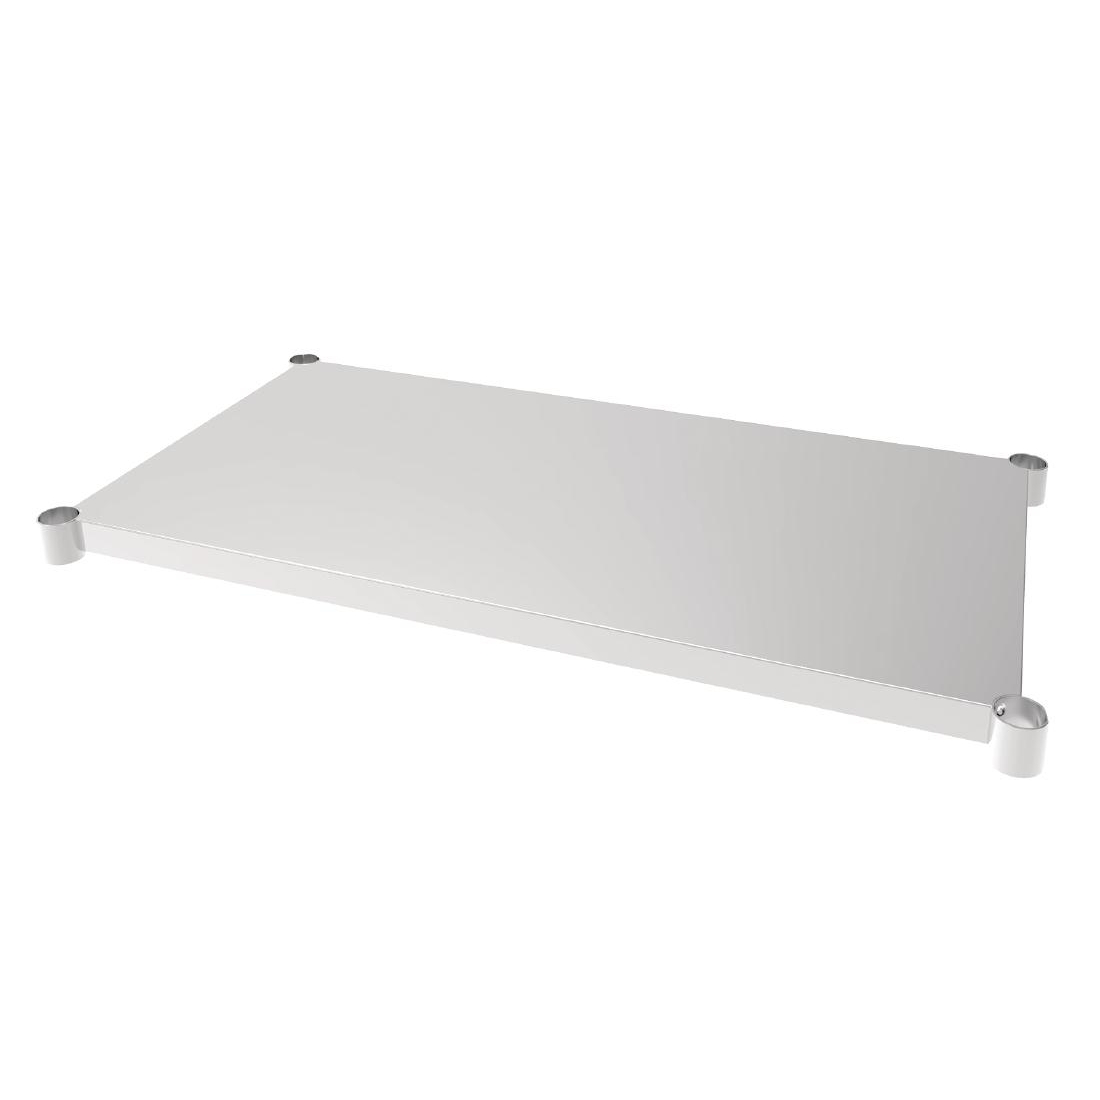 Vogue Stainless Steel Table Shelf 700x1200mm